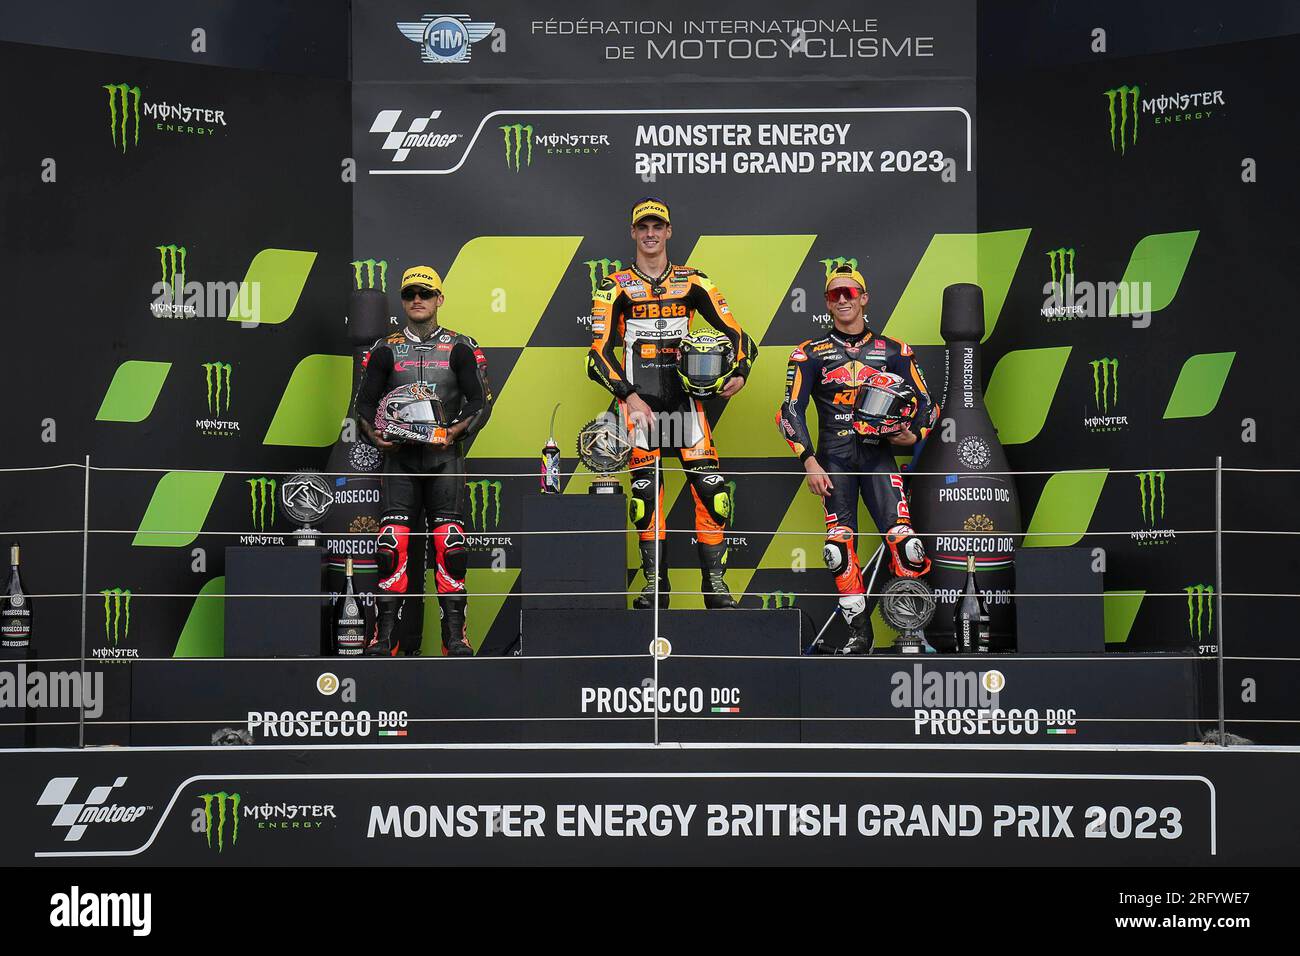 Silverstone, UK. 06th Aug, 2023. Races of MotoGP Monster Energy British Grand Prix at Silverstone Circuit. August 06, 2023 In picture: Moto2™ Fermin Aldeguer, Aron Canet and Pedro Acosta Carreras del Gran Premio Monster Energy de MotoGP de Gran Bretaña en el Circuito de Silverstone, 06 de Agosto de 2023 POOL/ MotoGP.com/Cordon Press Images will be for editorial use only. Mandatory credit: © MotoGP.com Credit: CORDON PRESS/Alamy Live News Stock Photo